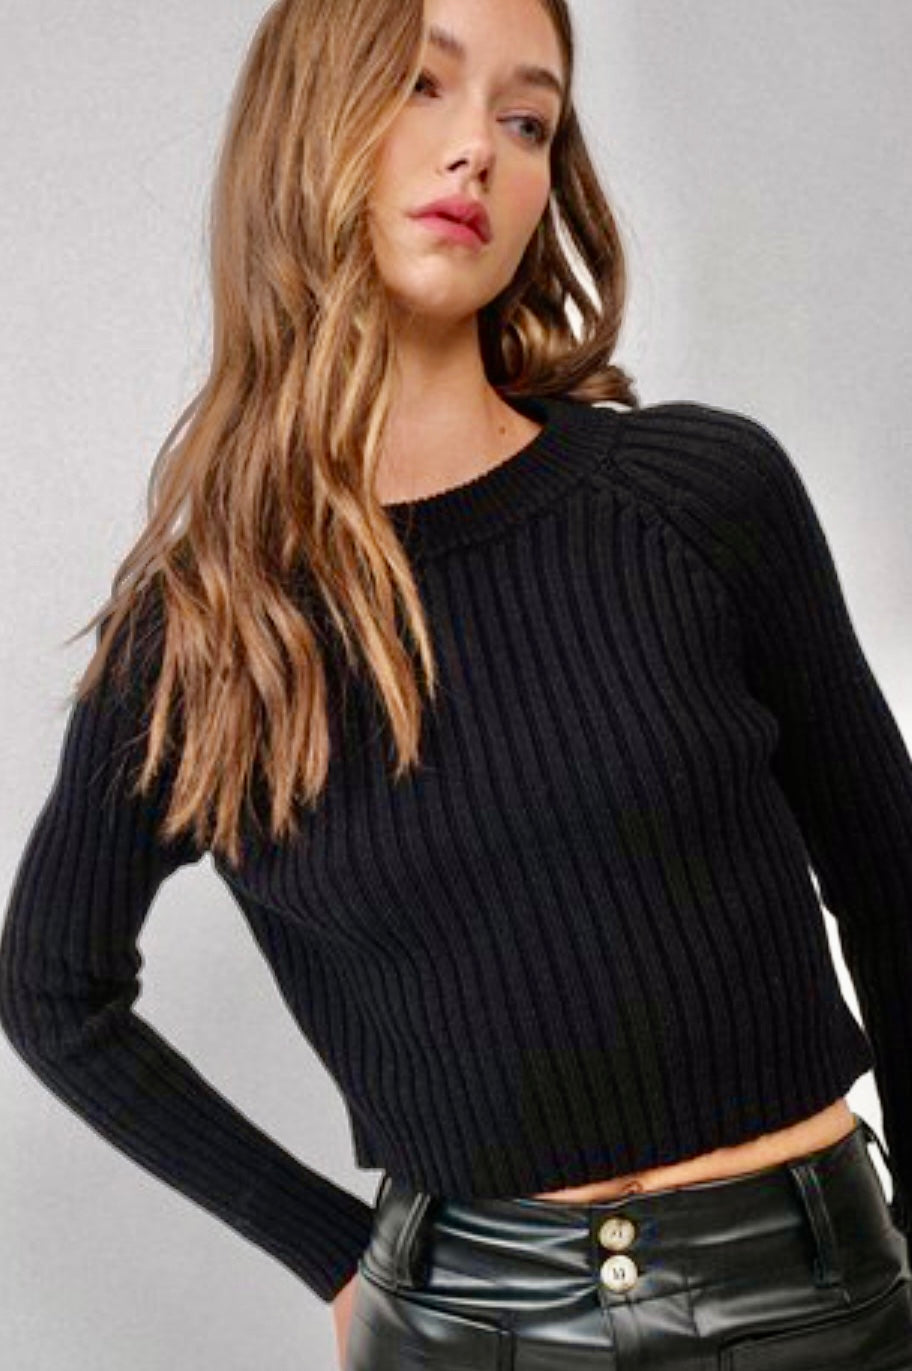 Ribbed black knit sweater